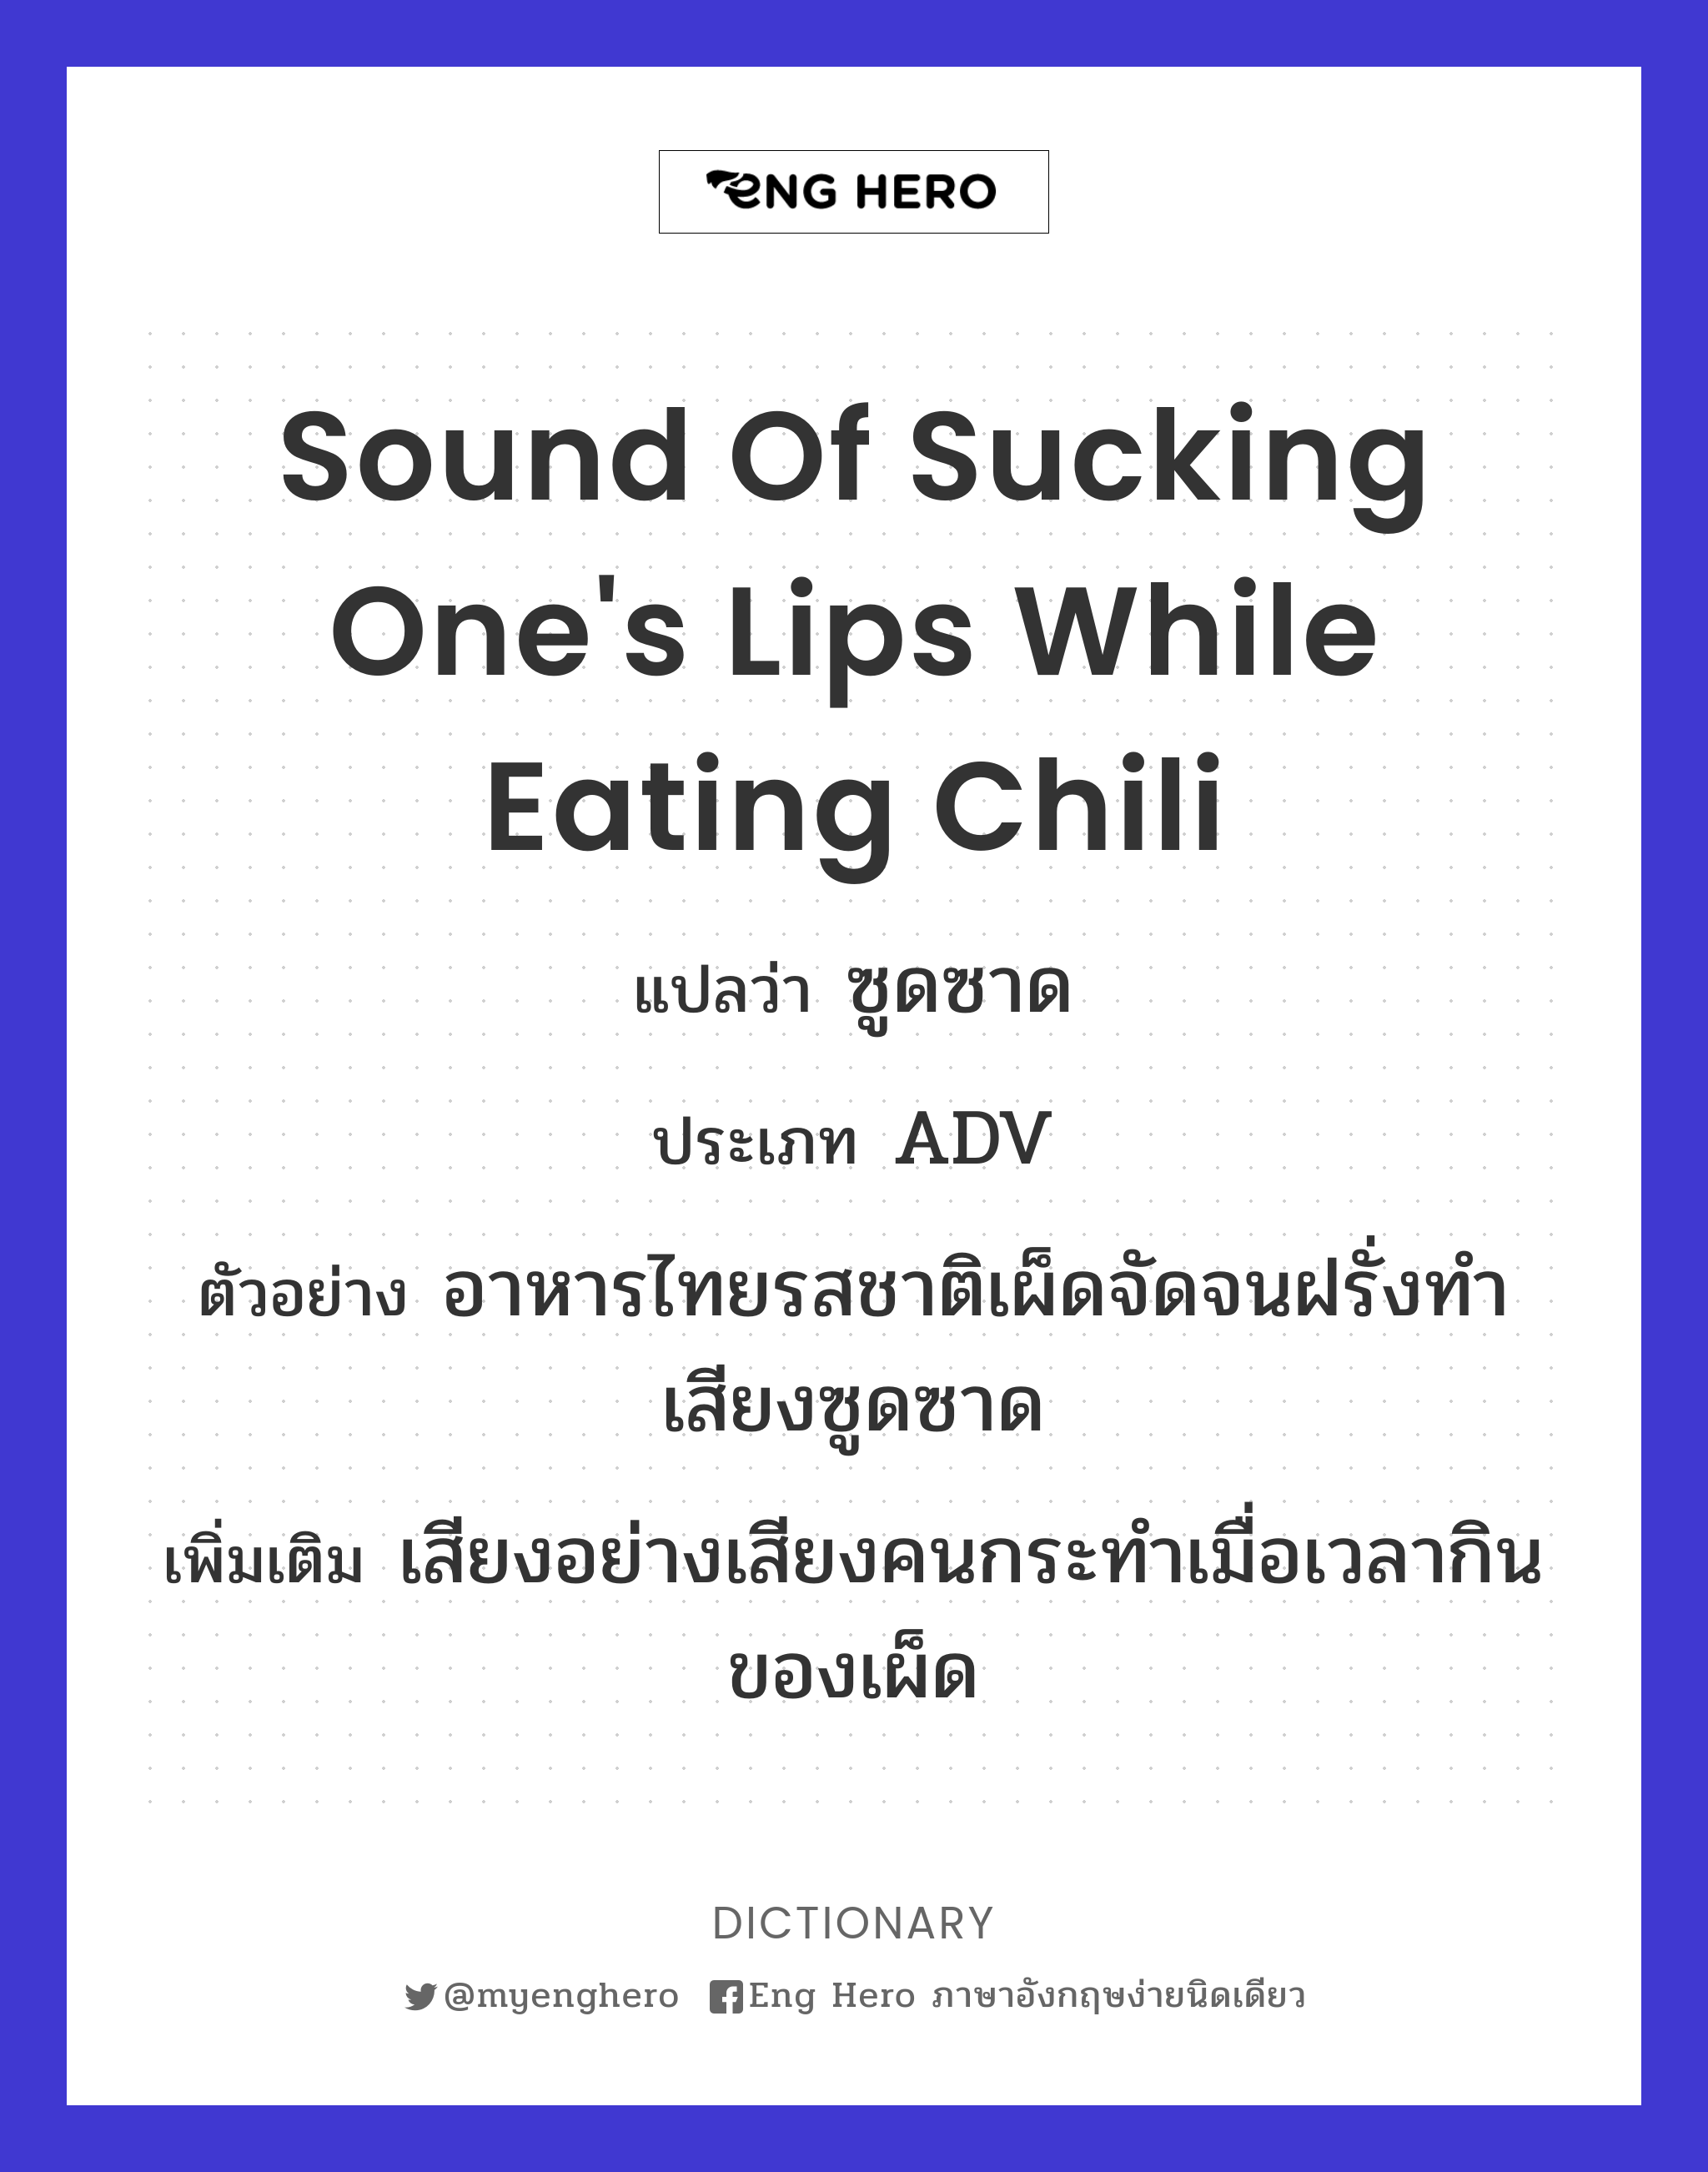 sound of sucking one's lips while eating chili